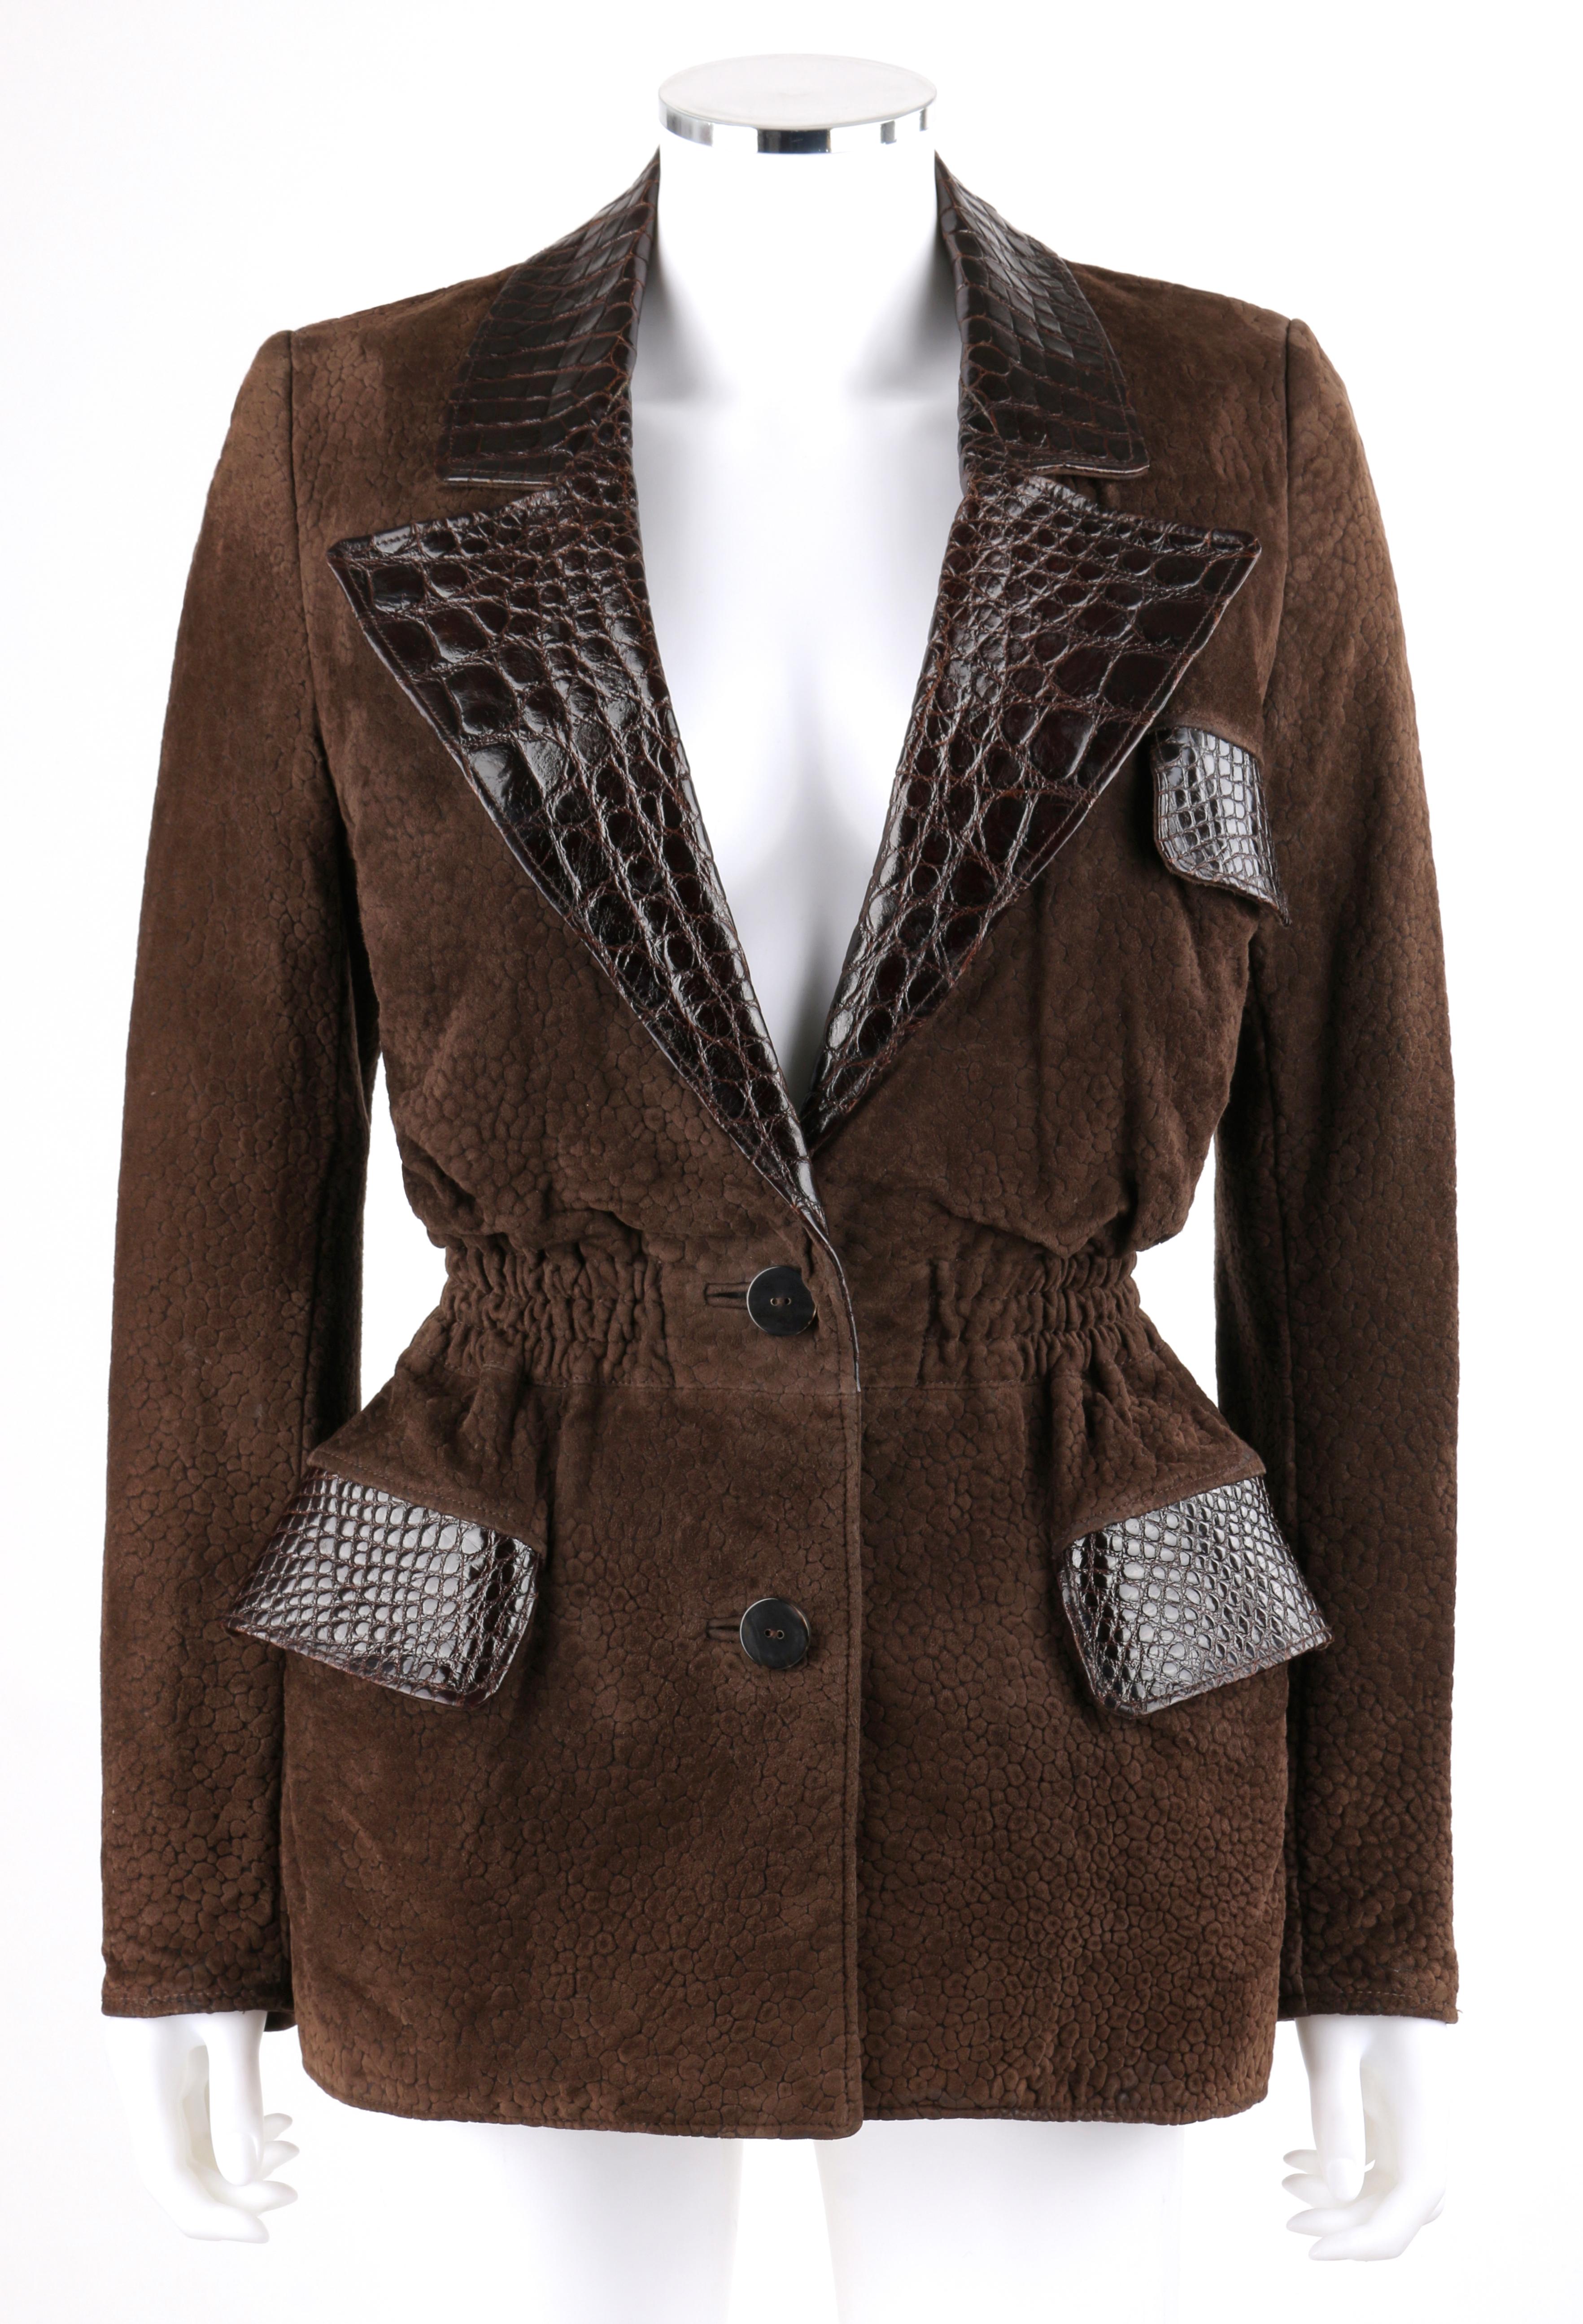 DESCRIPTION: VALENTINO Couture c.1980s Brown Crocodile Suede & Leather Cinched Waist Jacket
 
Circa: c.1980’s
Label(s): Valentino Couture; Valentino Pelle
Designer: Valentino Garavani 
Style: Cinched waist jacket
Color(s): Shades of brown
Lined: